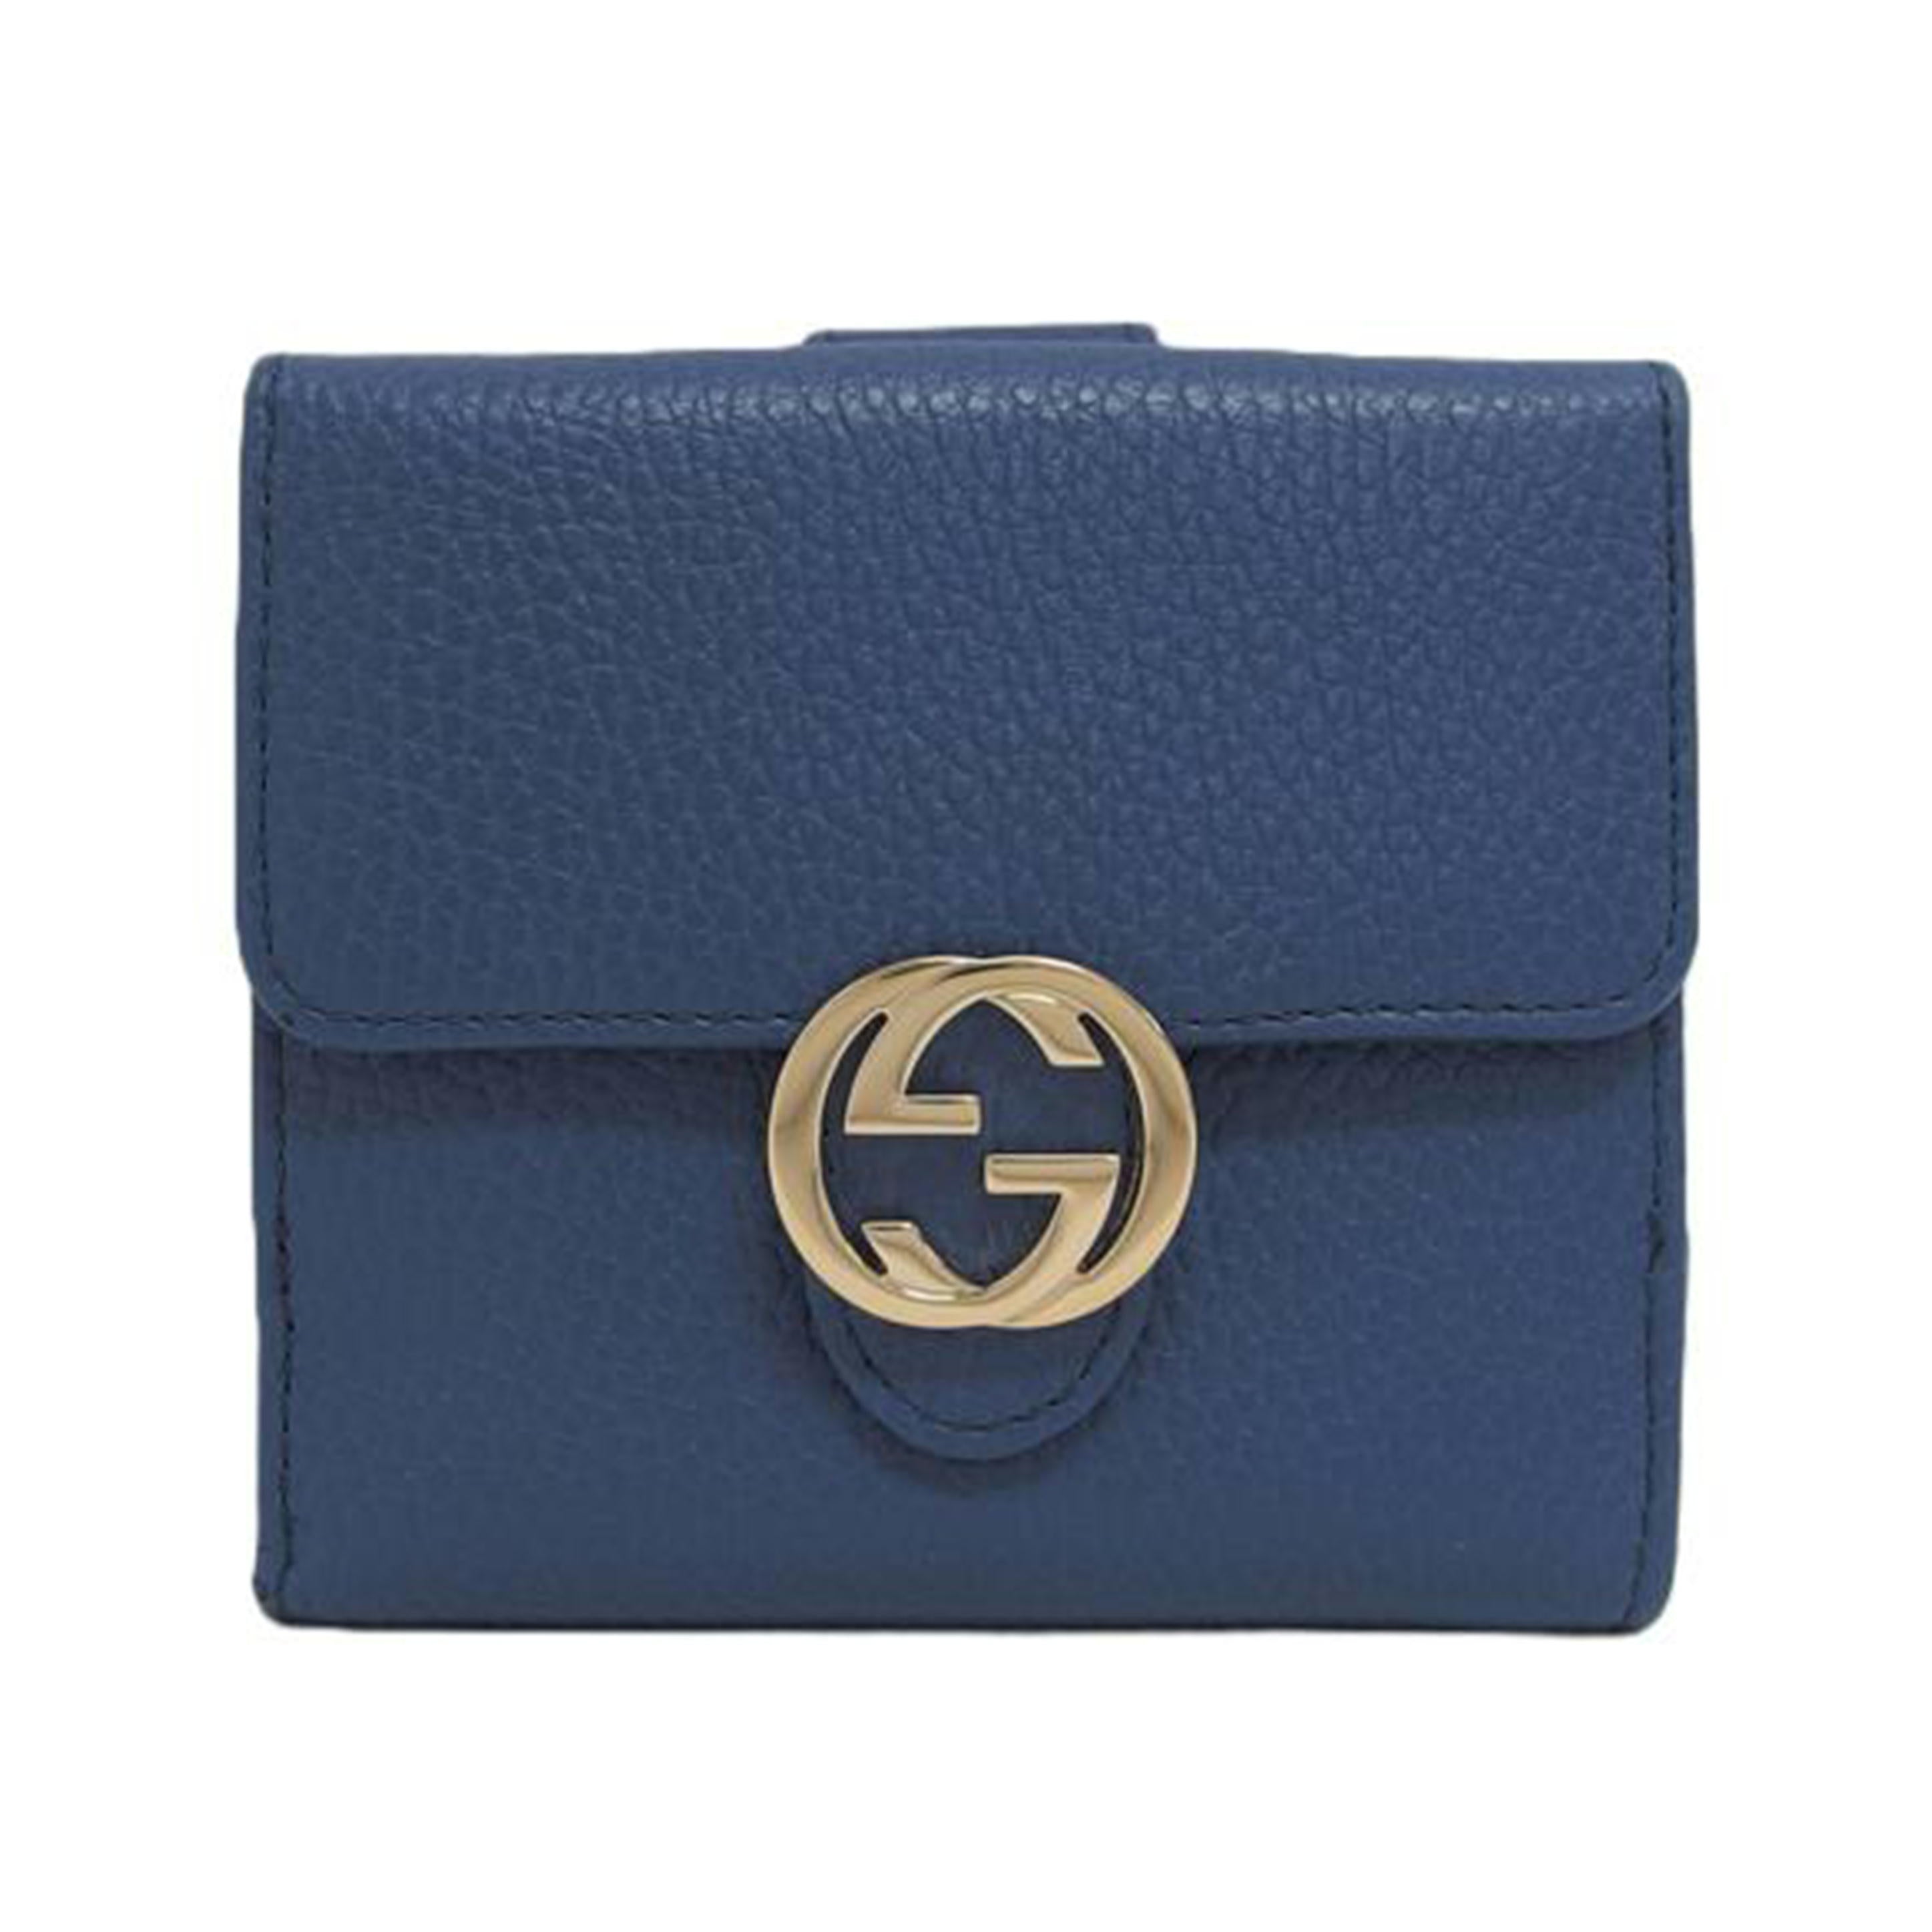 GUCCI（グッチ）商品一覧｜REXTA ONLINE 公式通販サイト